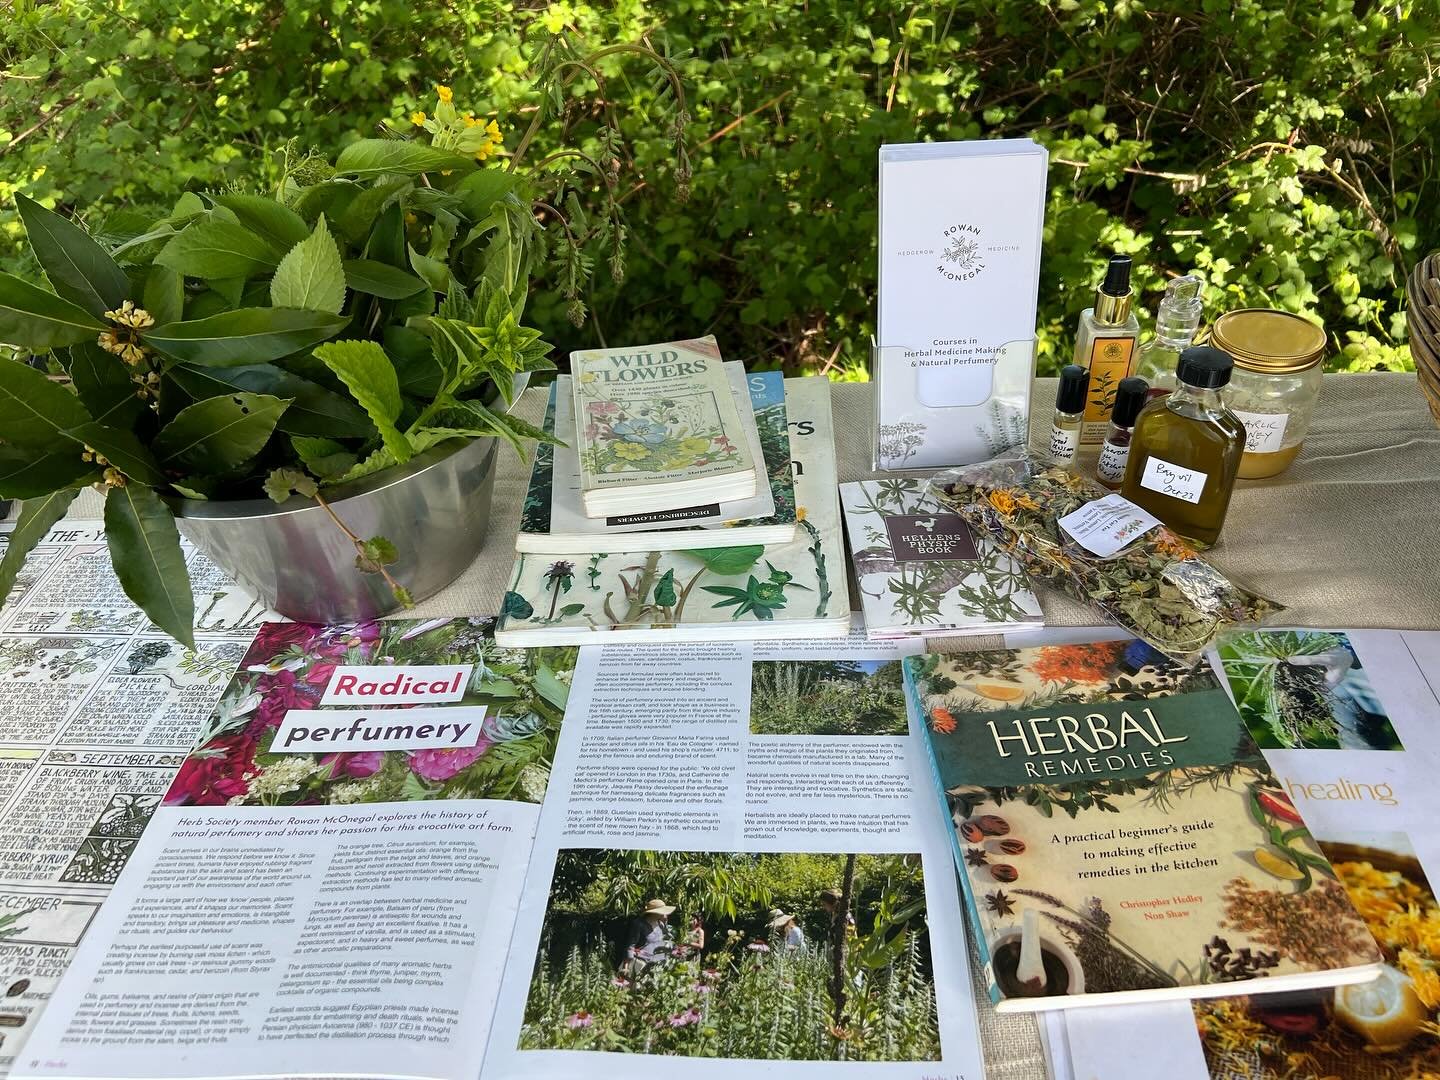 Lovely day at Monmouth Wye Valley River Festival - wonderful parade with the River Goddesses, No Fit State circus performance, lots of activities and songs, and Liz knight and I being plantaholics together @foragefinefoods #herblovers #foragers #gath